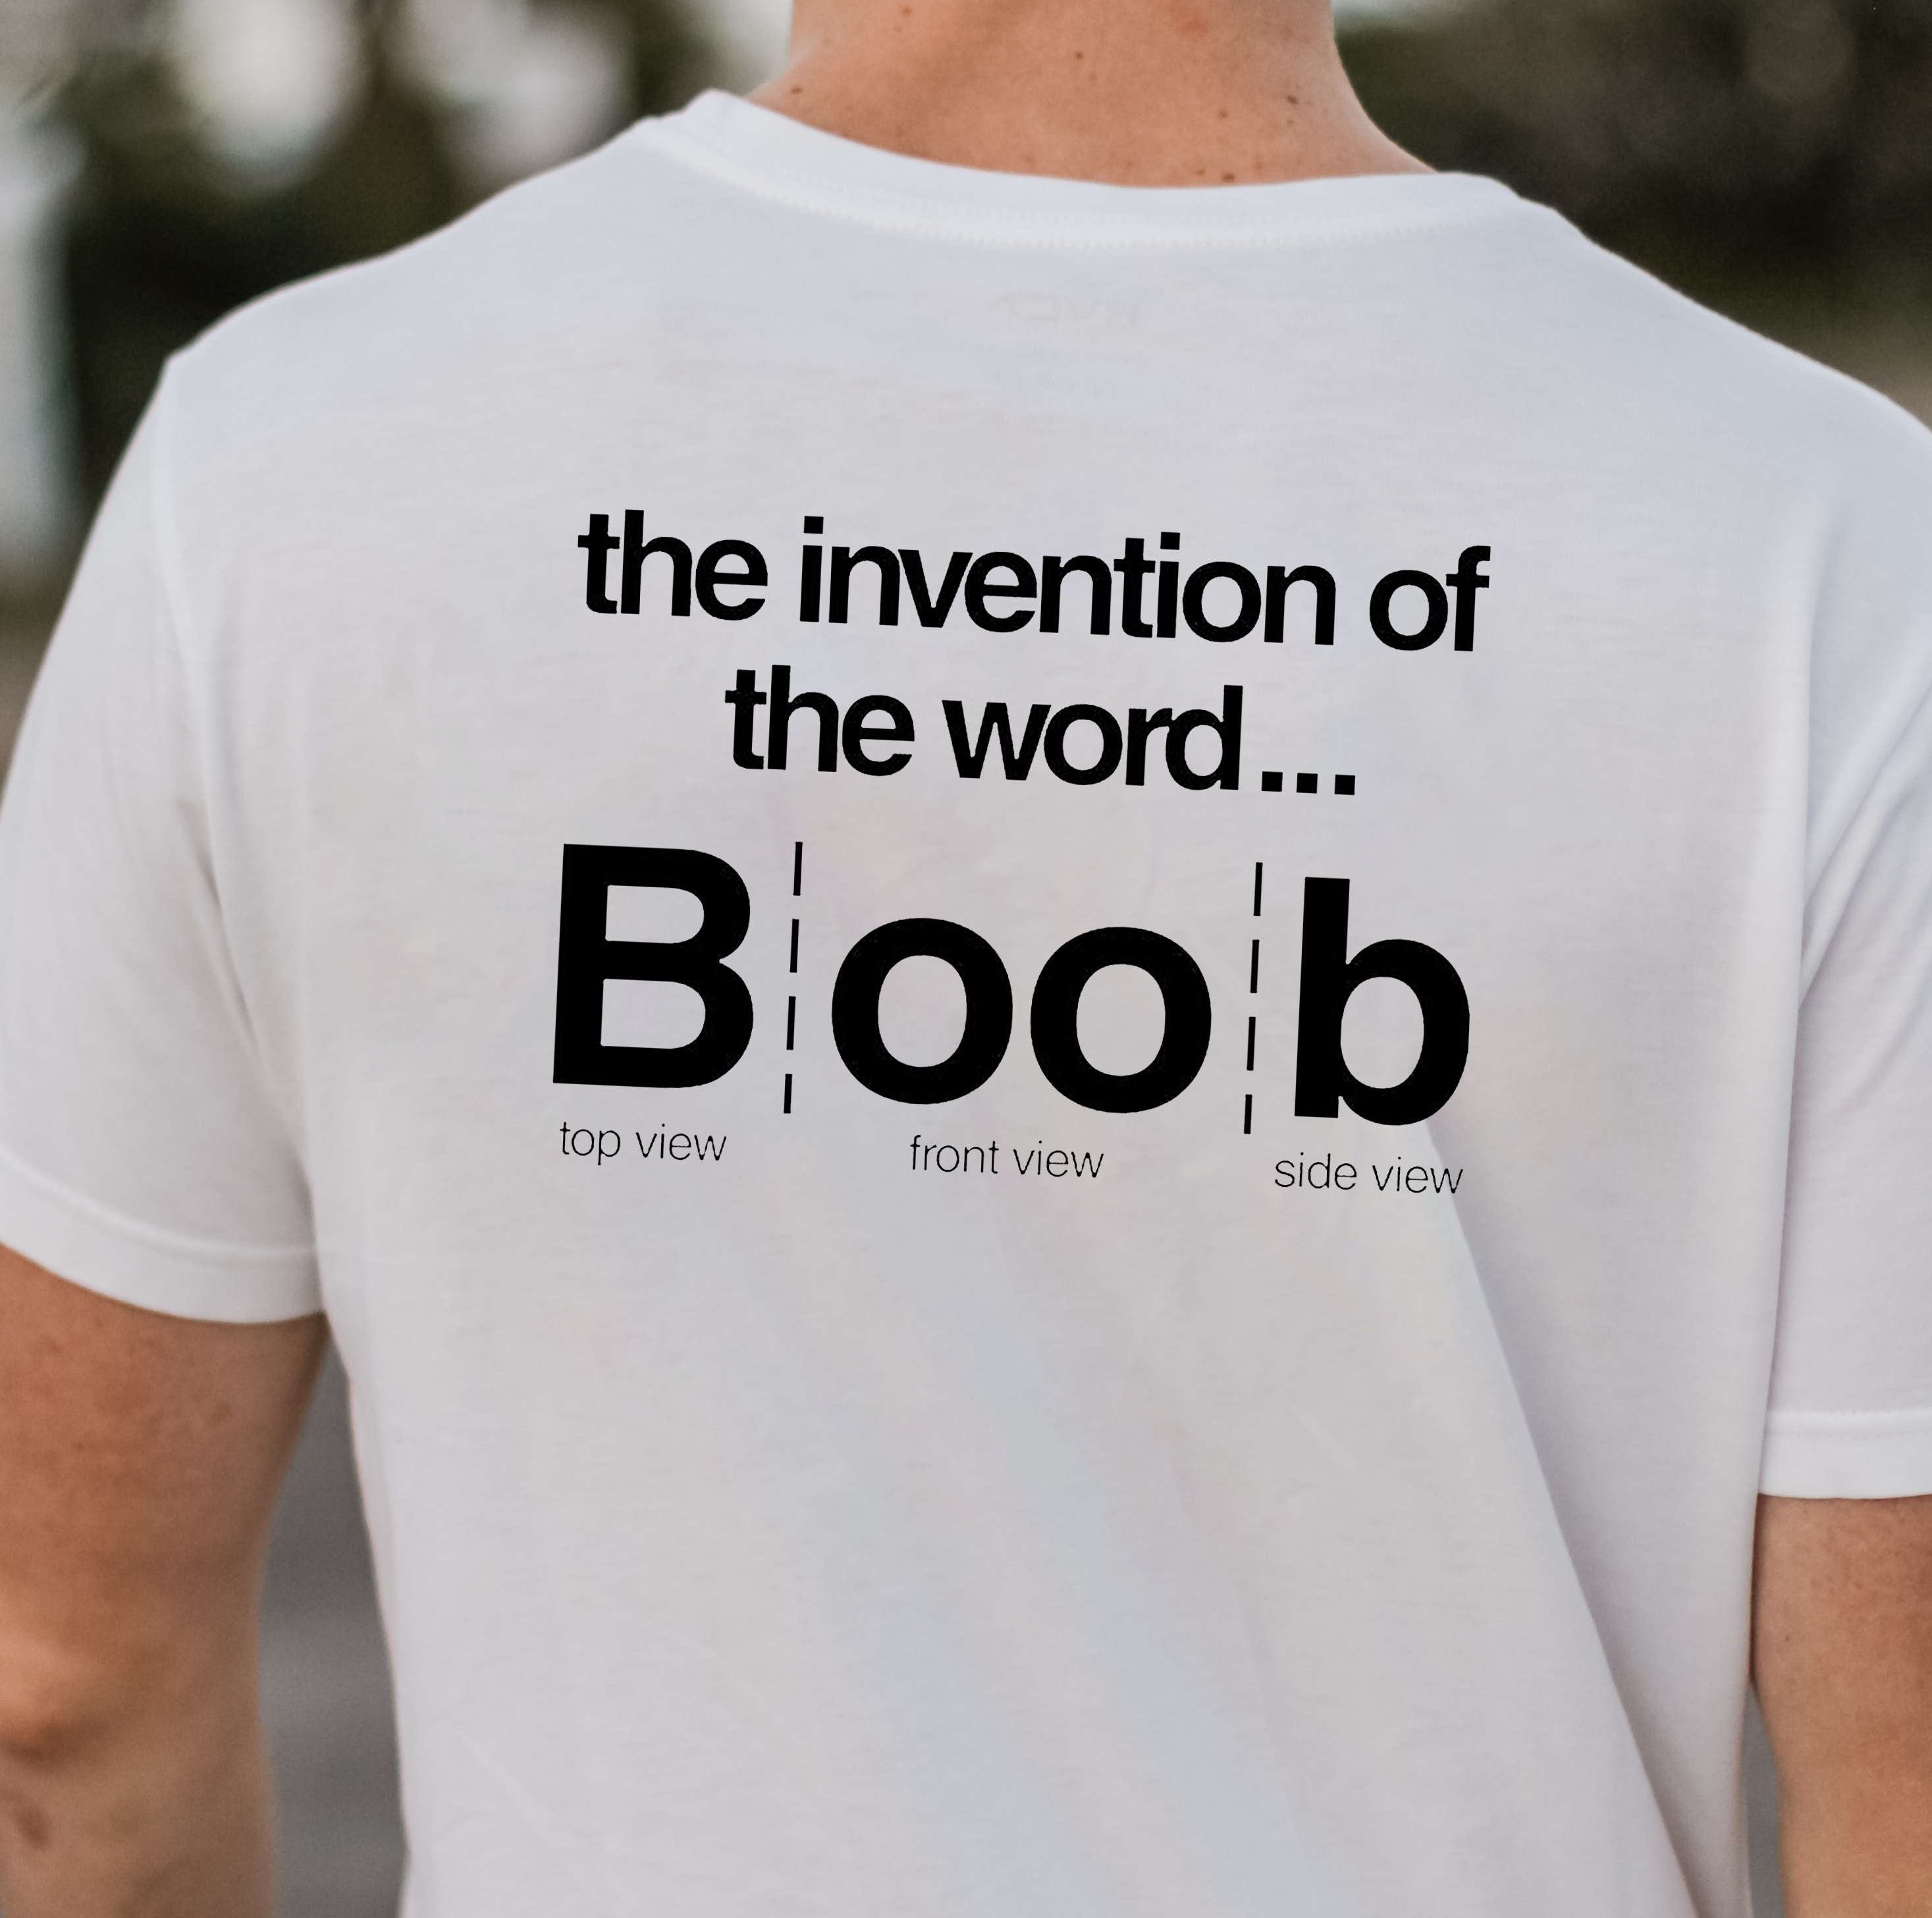 The invention of the word.. Boob